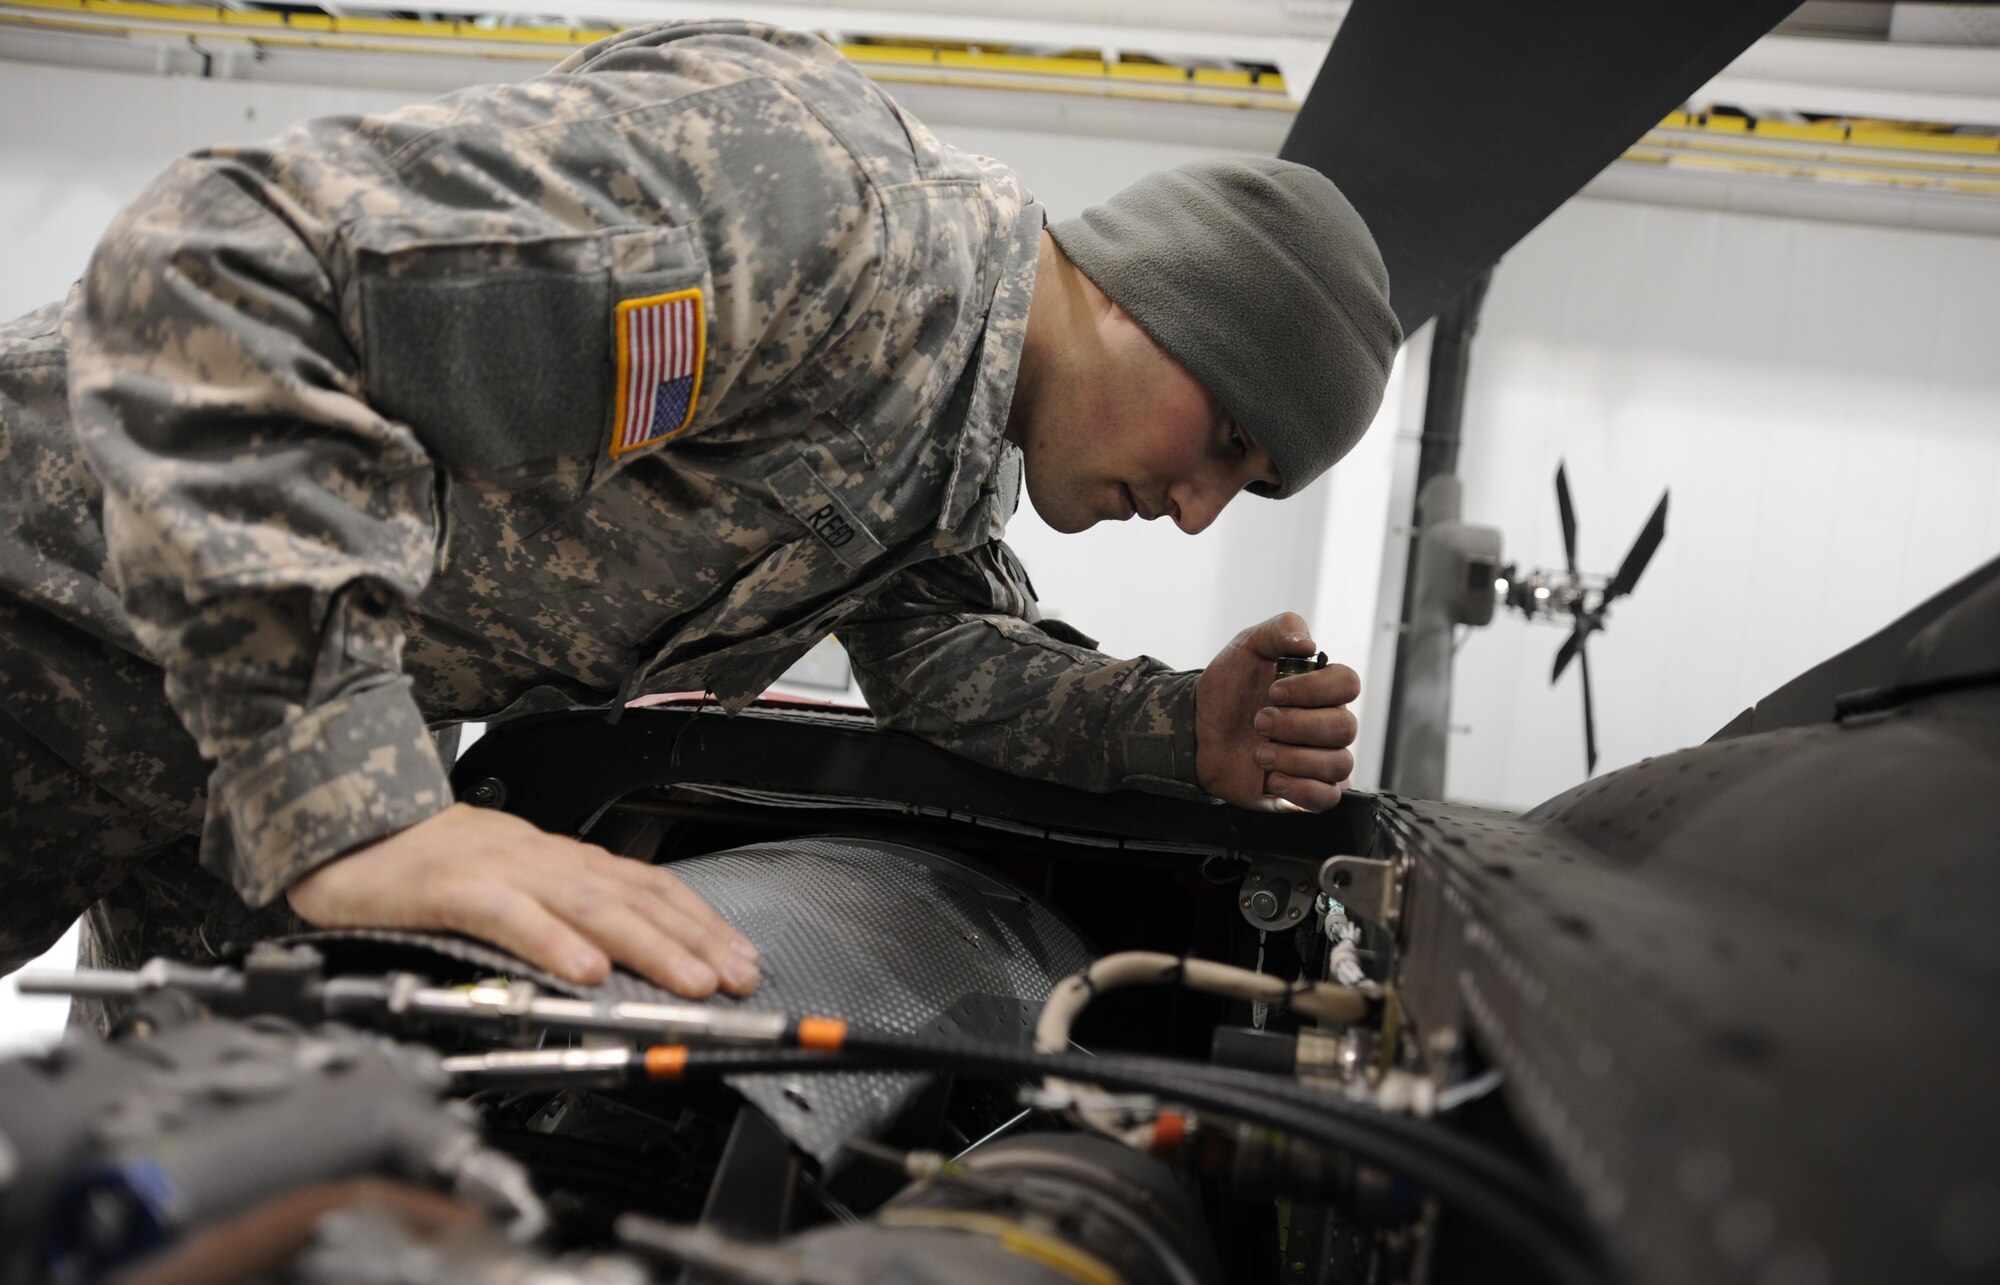 WHITEMAN AIR FORCE BASE, Mo. -- U.S. Army Specialist Jonathan Reed, 1-135th Attack Reconnaissance Battalion AH 64D Apache Longbow crew chief, performs a daily inspection on an AH 64D Apache Longbow, Jan. 16. Daily inspections help Apache mechanics and crew chiefs apply preventative maintenance as a countermeasure against problems that might arise in flight. (U.S. Air Force photo/Staff Sgt. Nick Wilson) (Released)